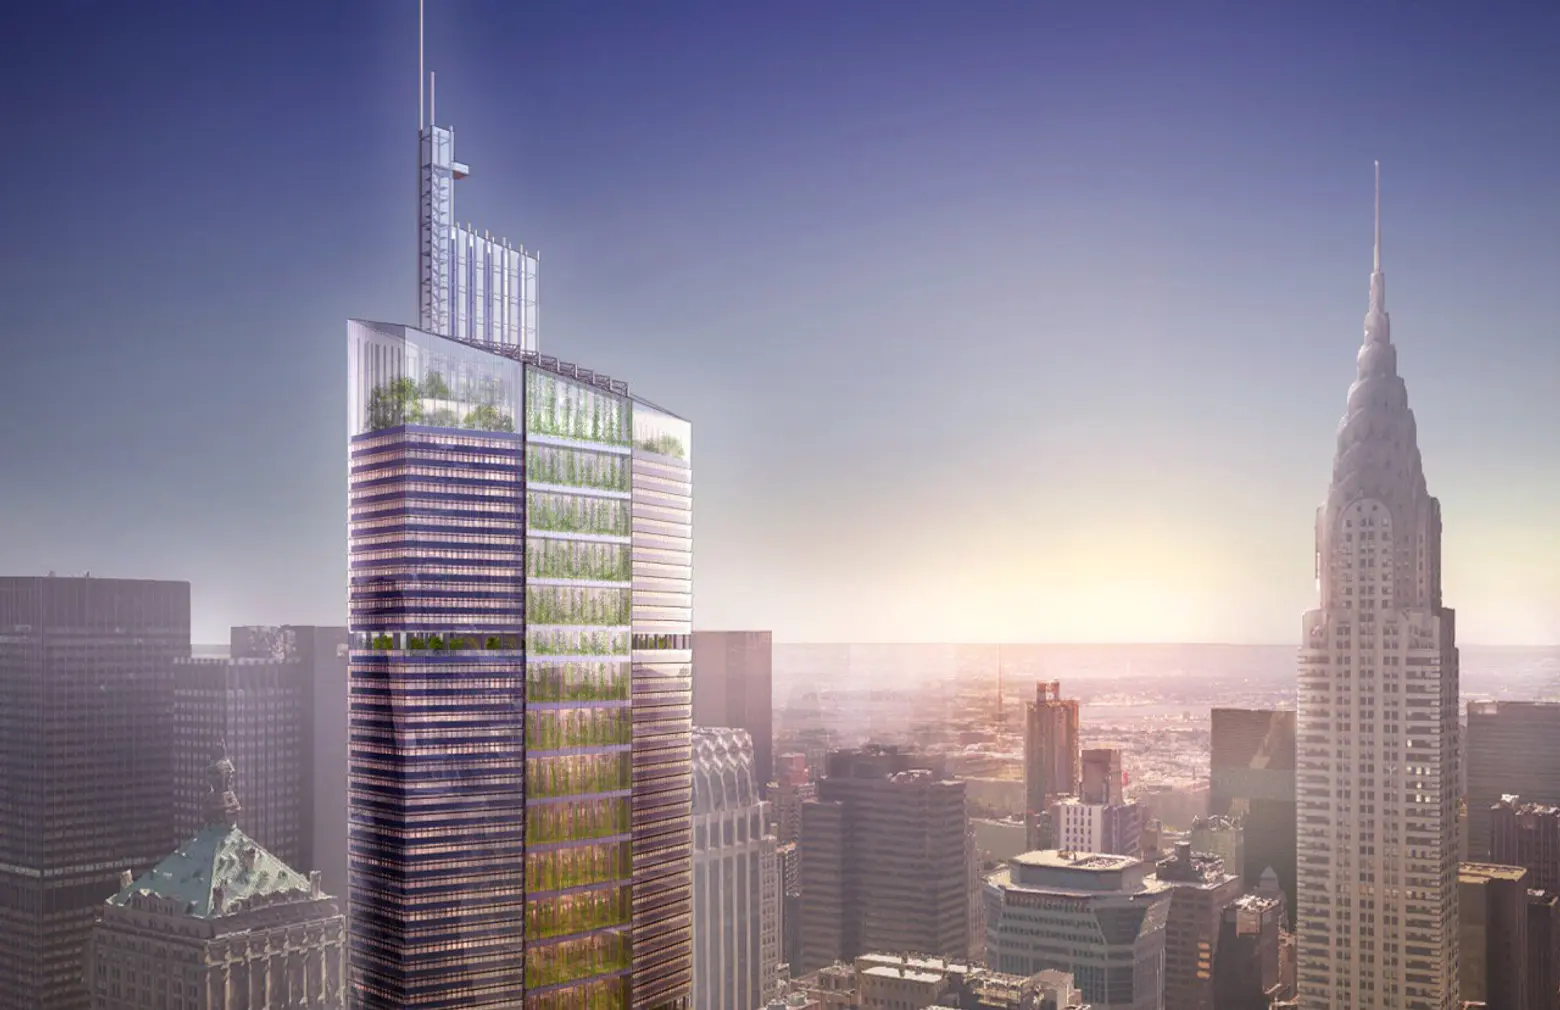 Metals in Construction, Reimagine a New York City Icon, MetLife Buidling, PanAm Building, VOA, Werner Sobek, SHoP, Heintges, CASE-RPI, StudioTJOA, FXFOWLE, Thornton Tomasetti, Dagher Engineering, AECOM, Lemay